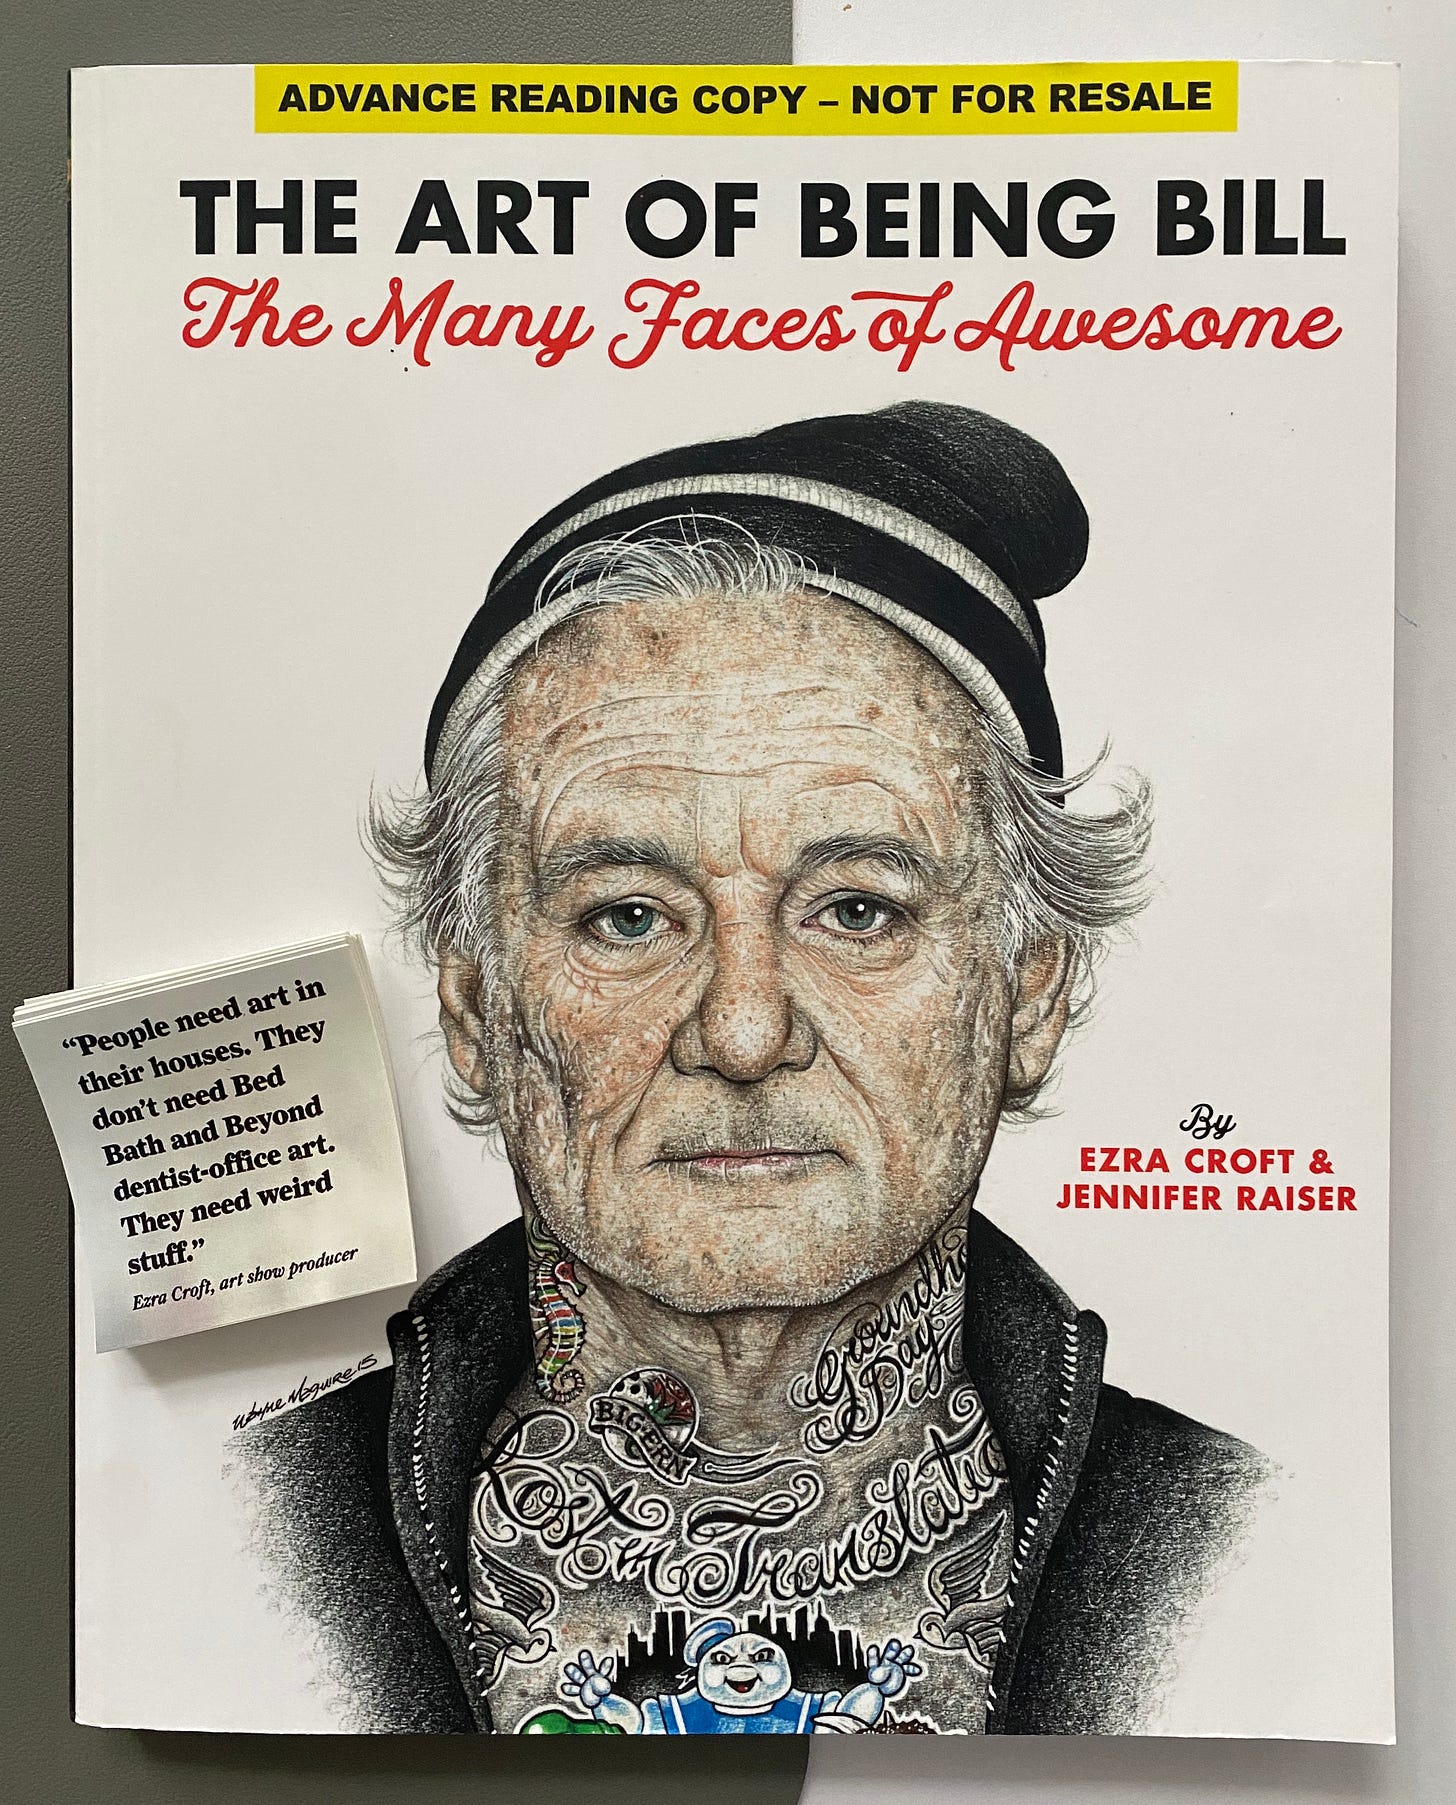 A copy of the pre-sale book "The Art of Being Bill" by Ezra Croft and Jennifer Raiser with some stickers sitting on top. The stickers read "People need art in their houses. They don't need Bed Bath and Beyond dentist-office art. They need weird stuff."